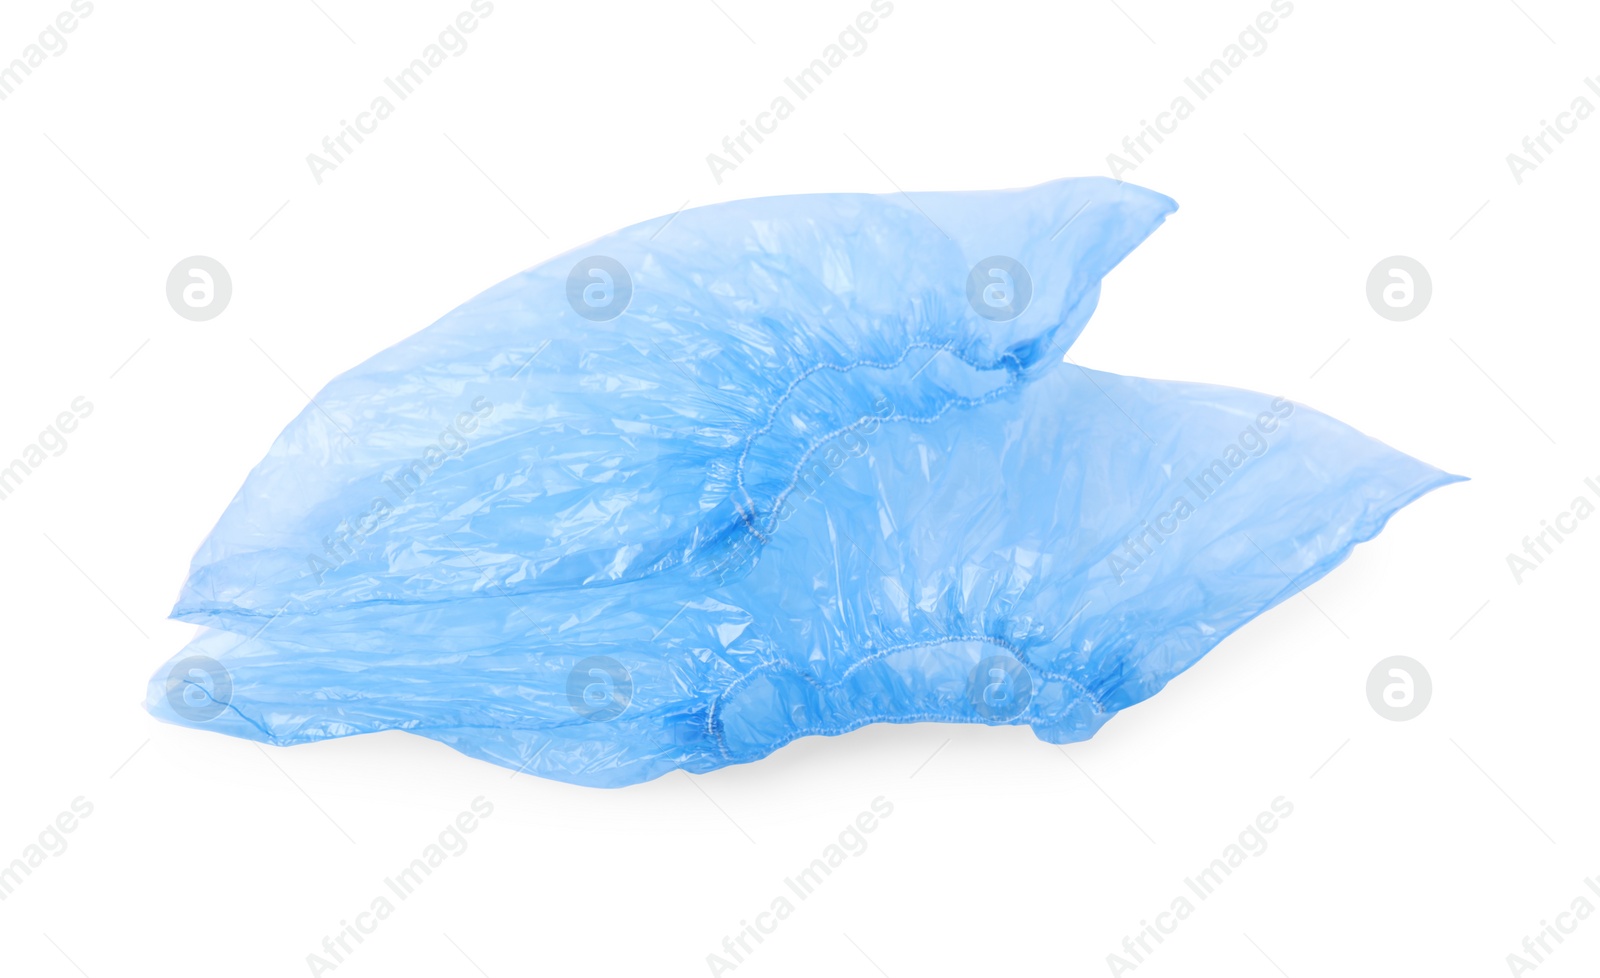 Photo of Pair of blue medical shoe covers isolated on white